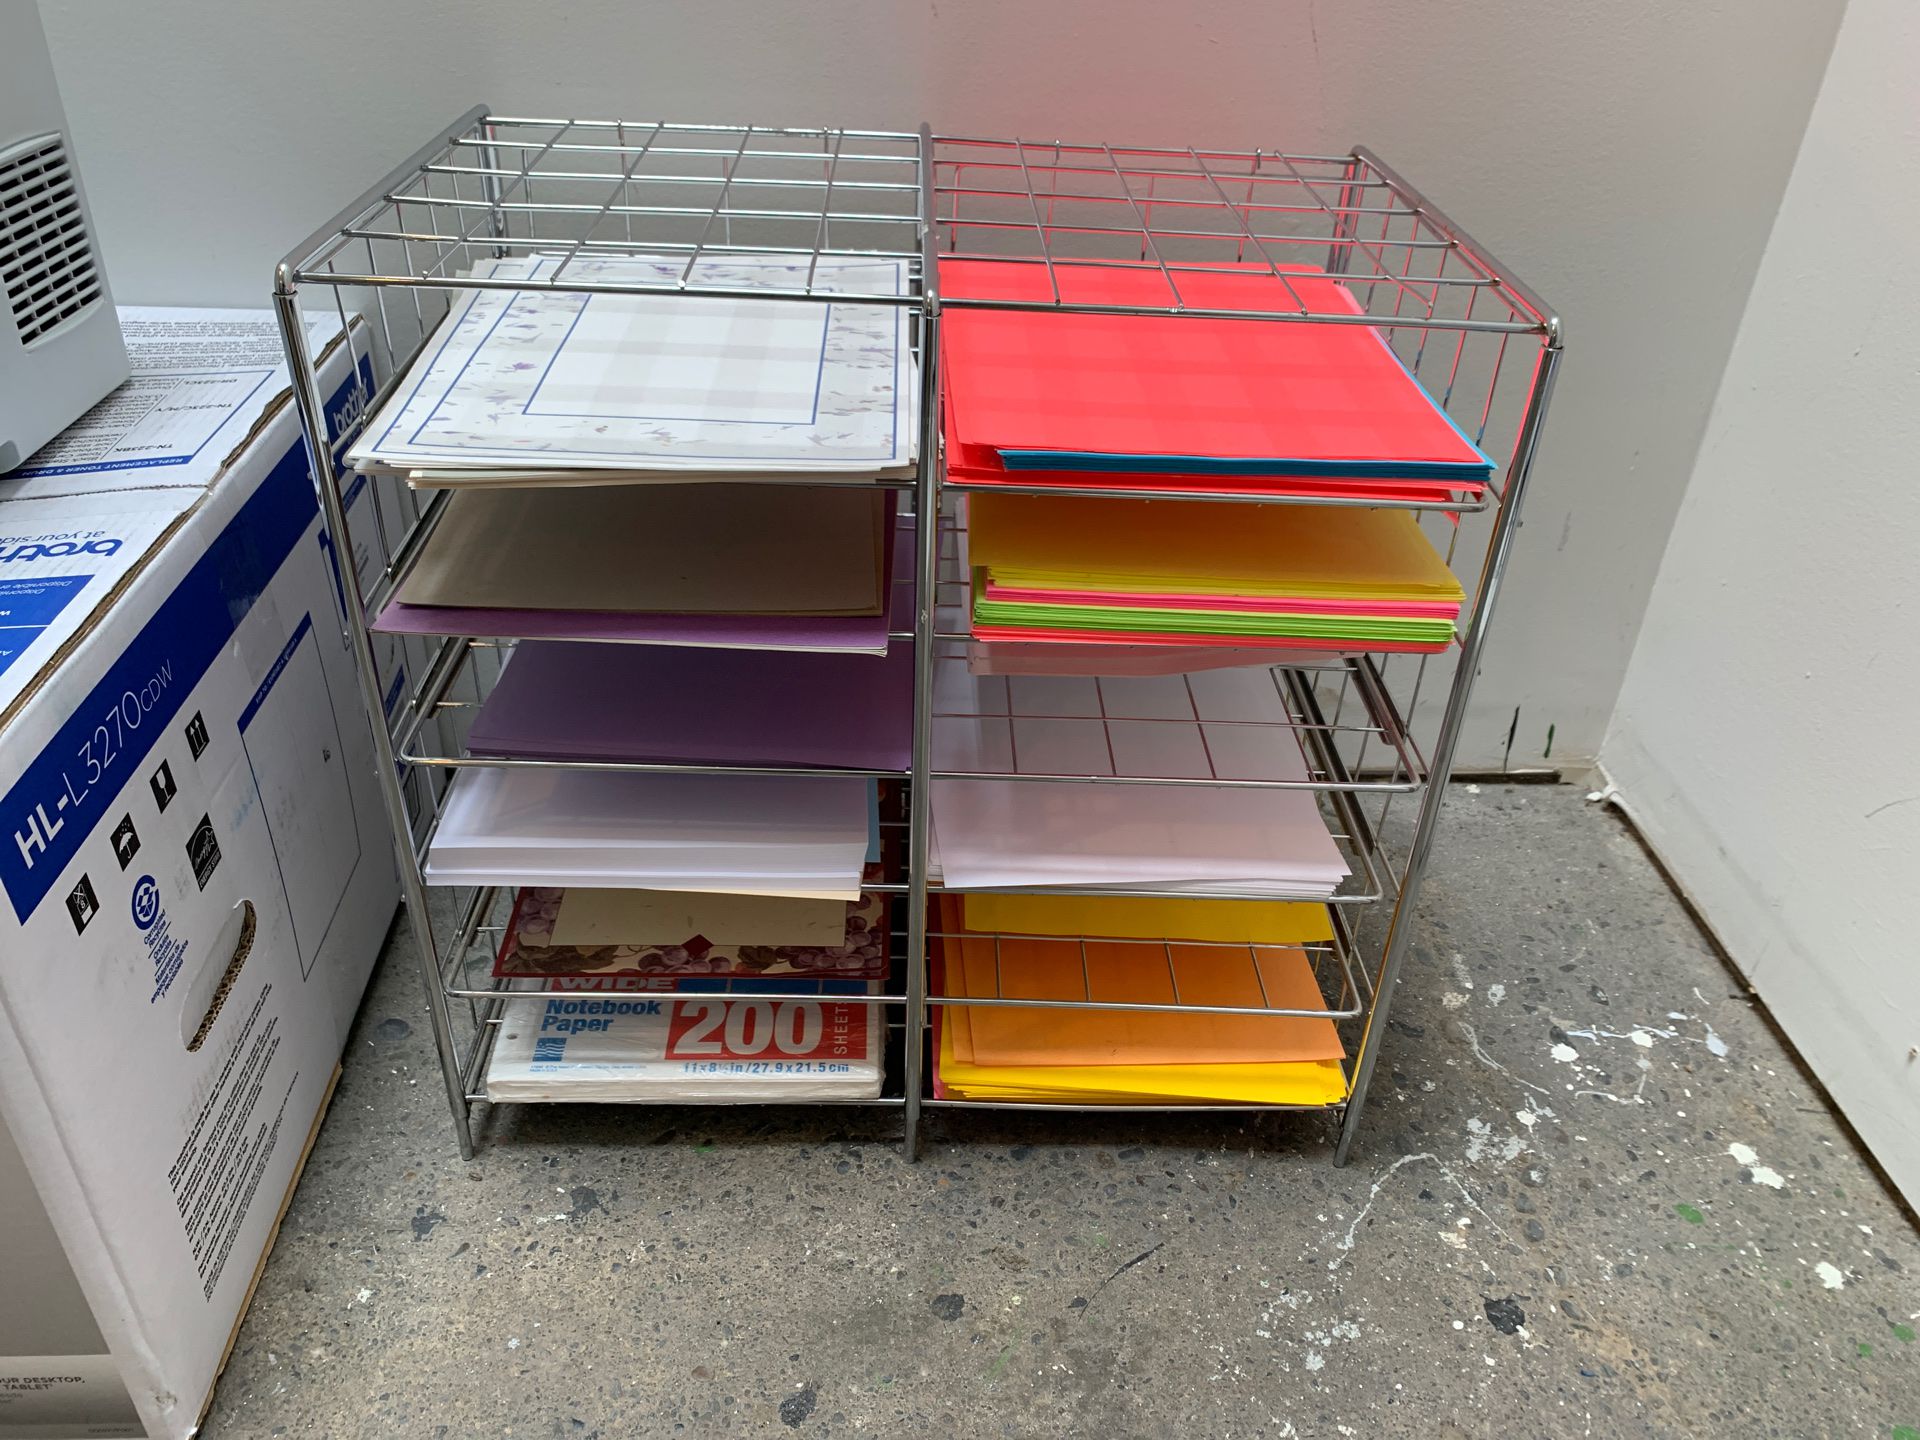 Metal paper organizer shelves with the paper